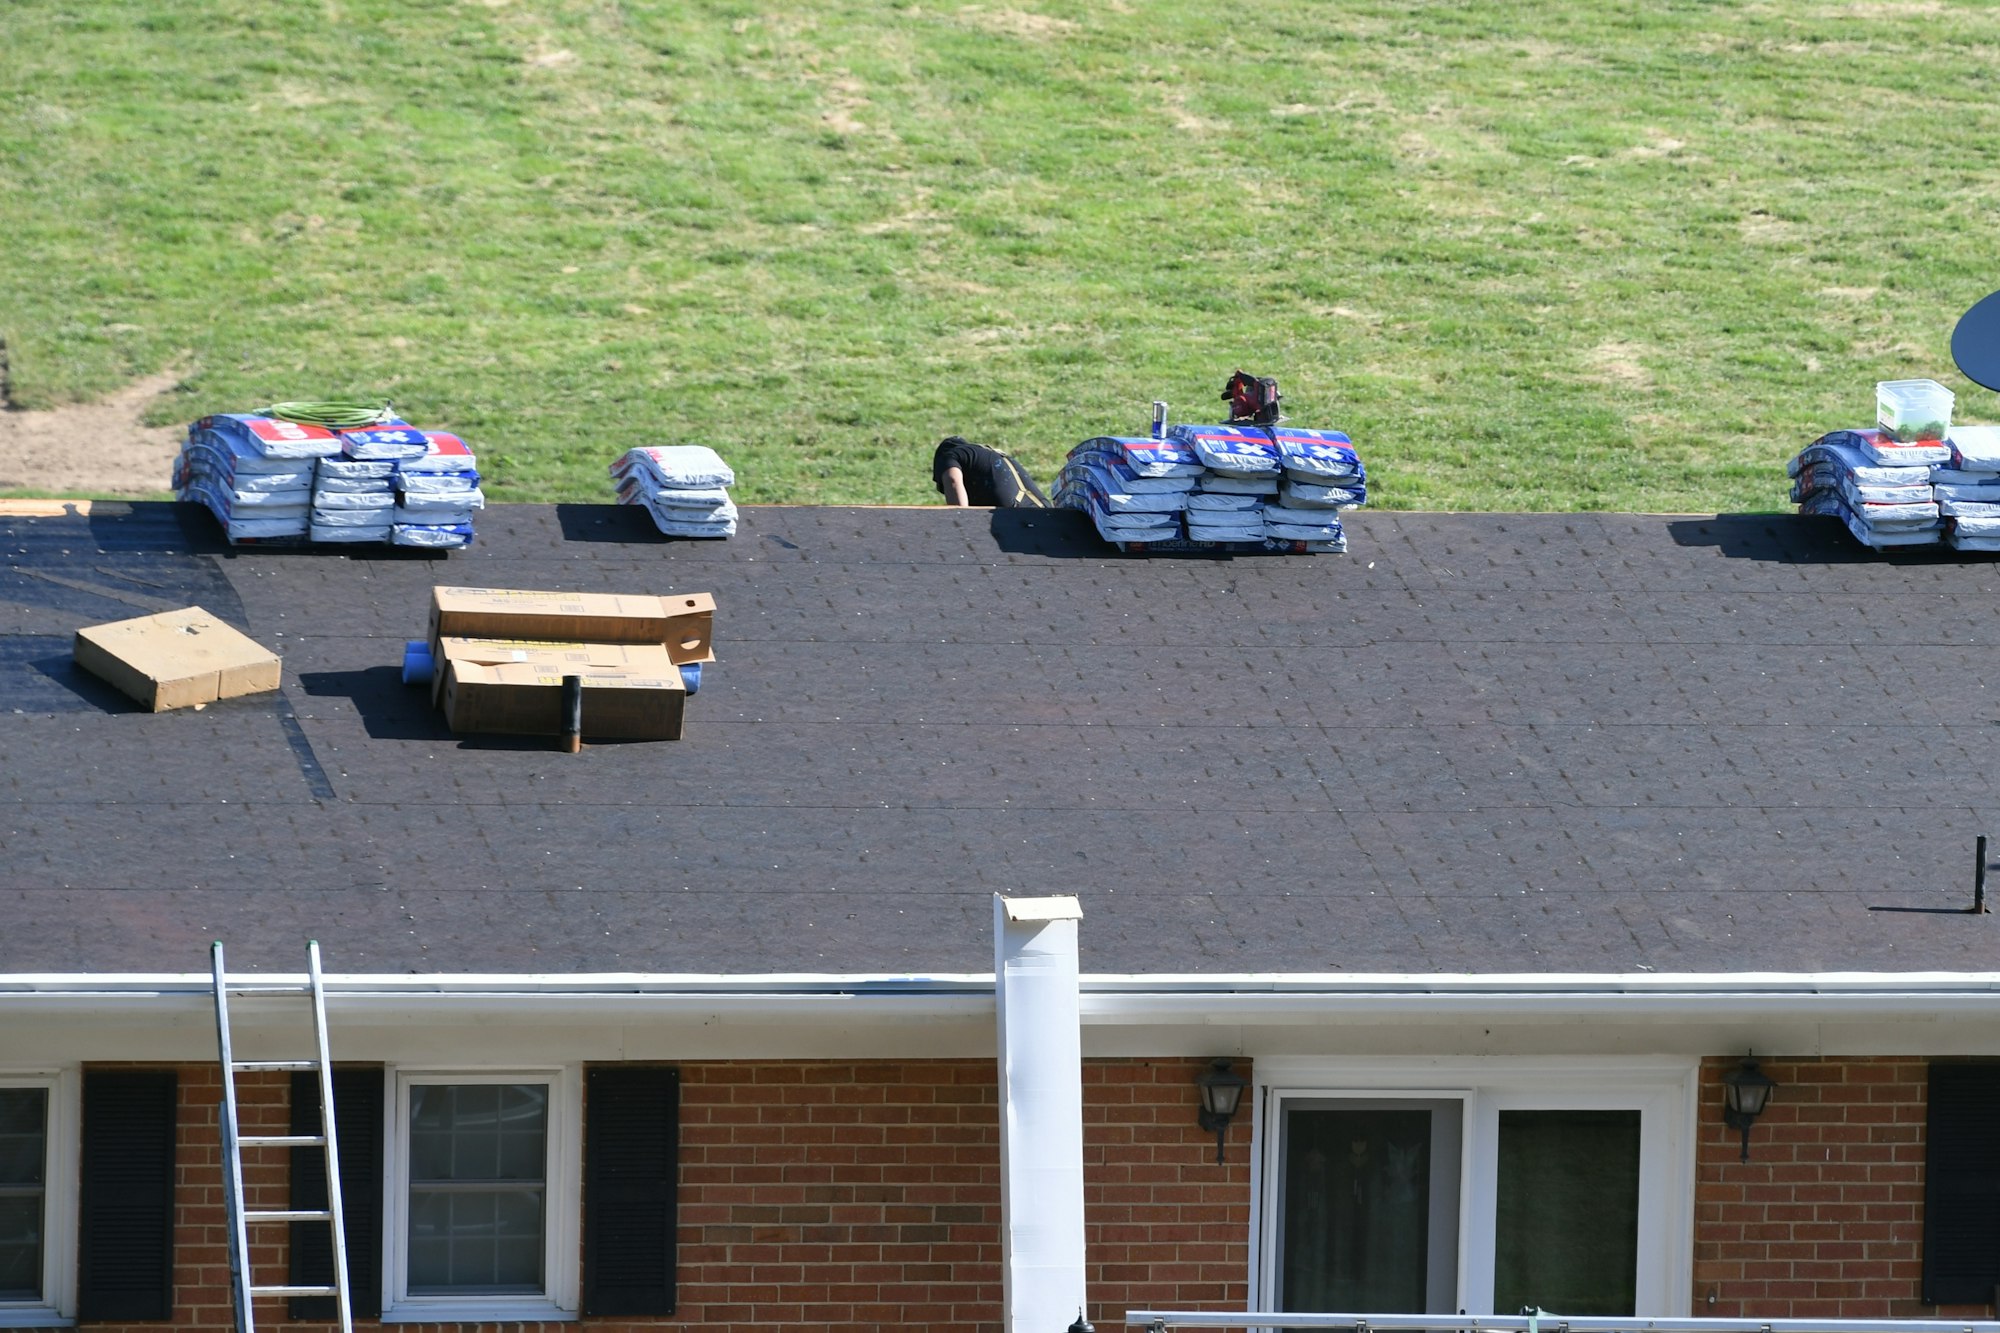 Roofers roofing company repairing a damaged roof with holes, insurance claim storm damage